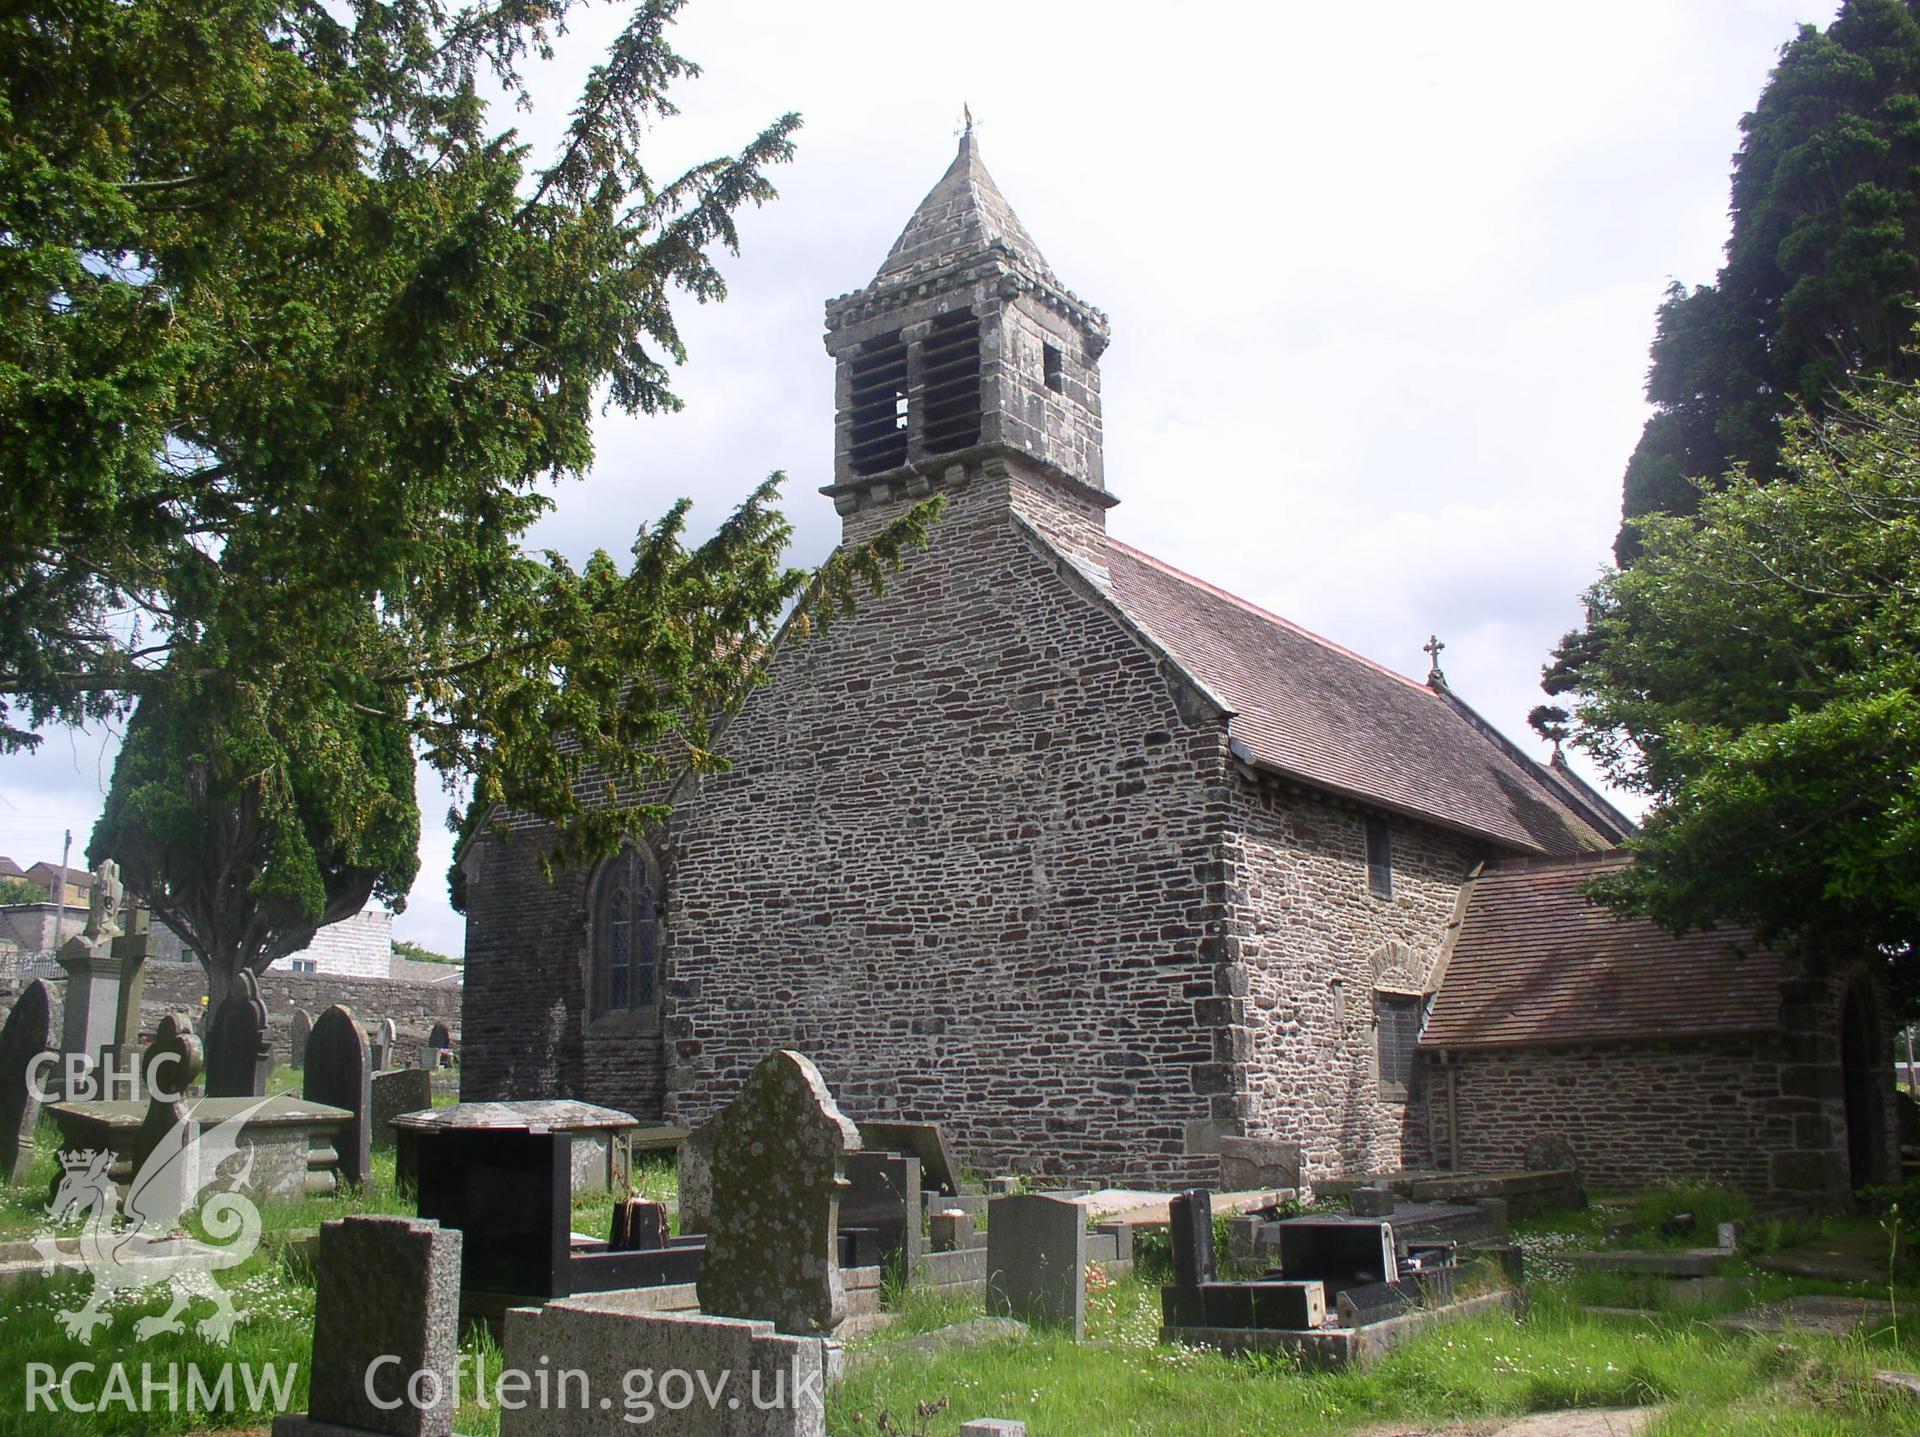 Colour digital photograph showing the exterior of the Church of St. David, Betws; Glamorgan.